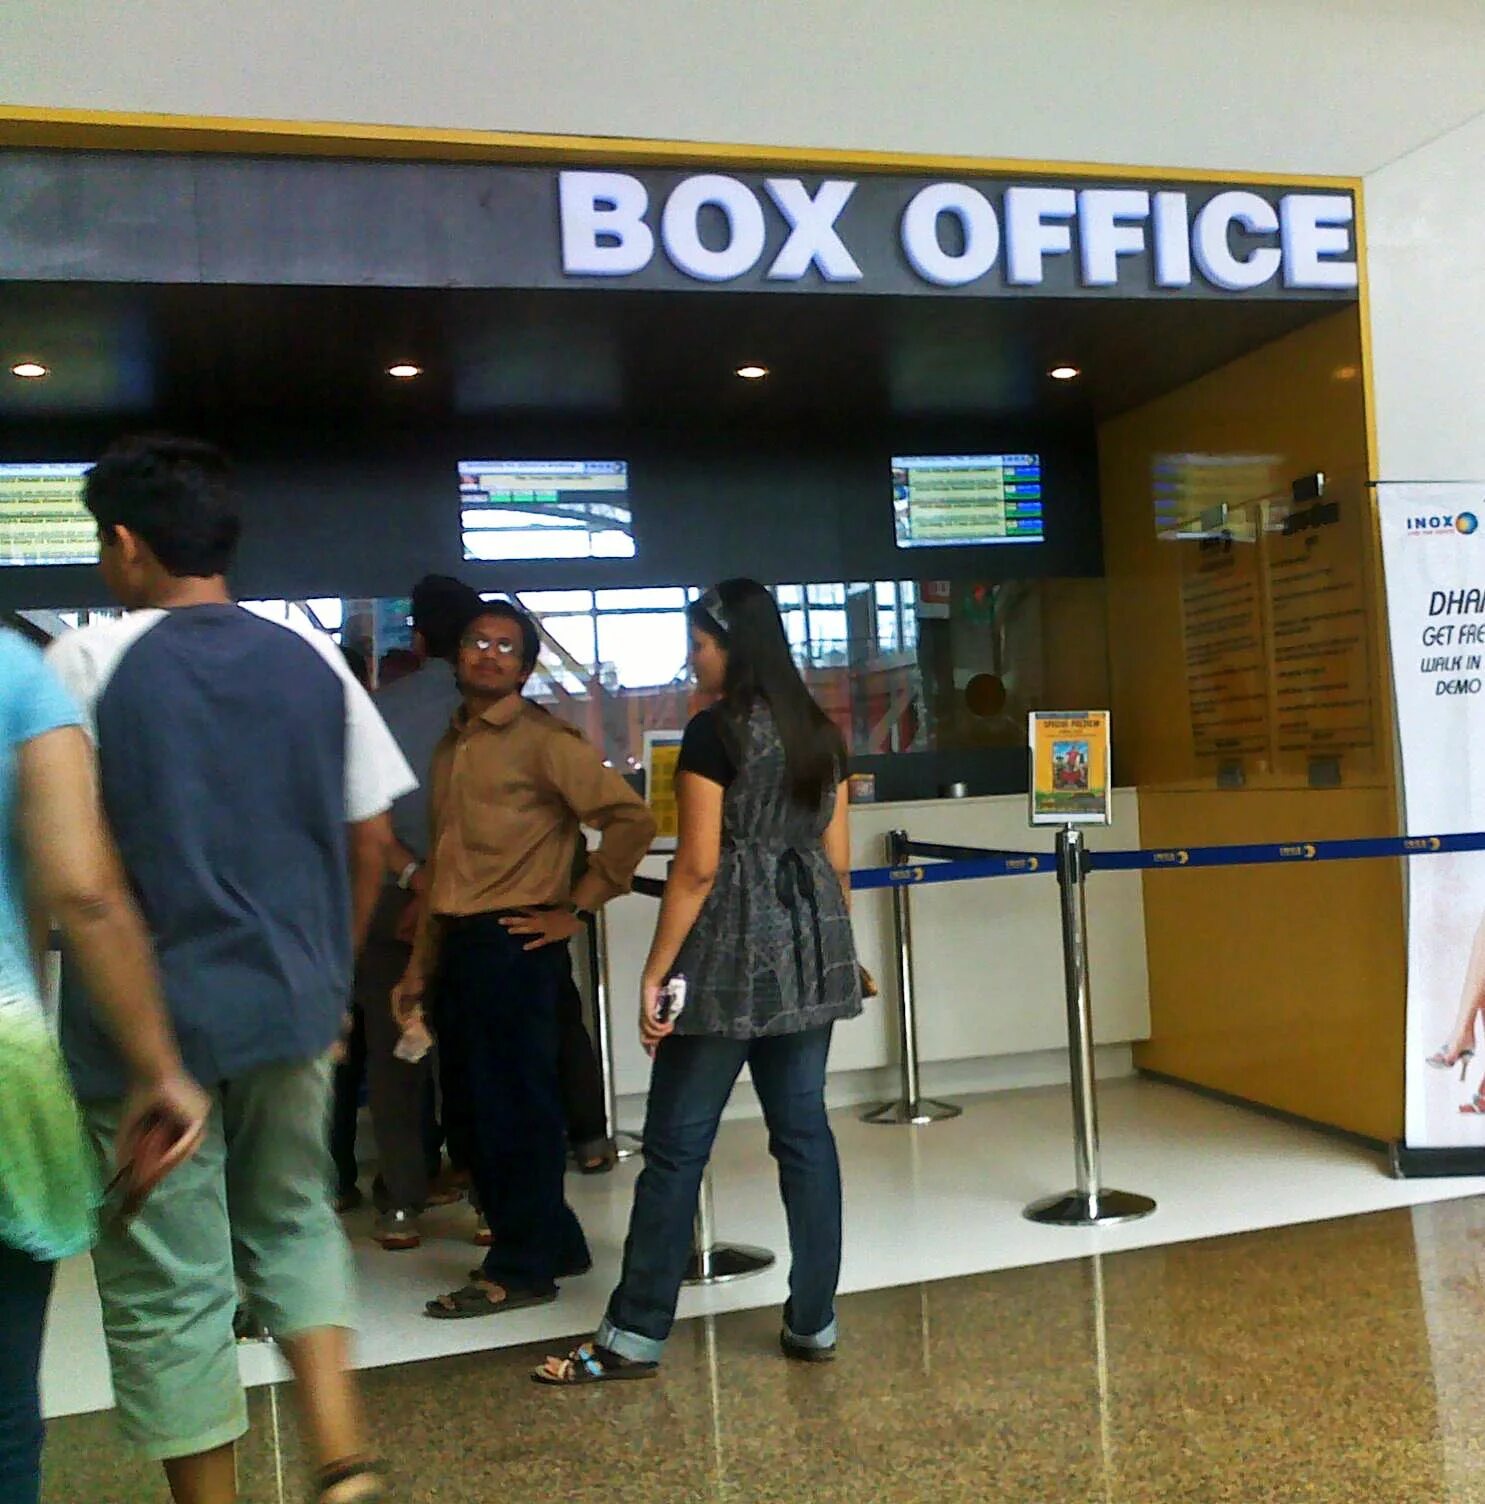 Box Office. Box Office in the Theatre. Cinema Box Office. Buy tickets theater